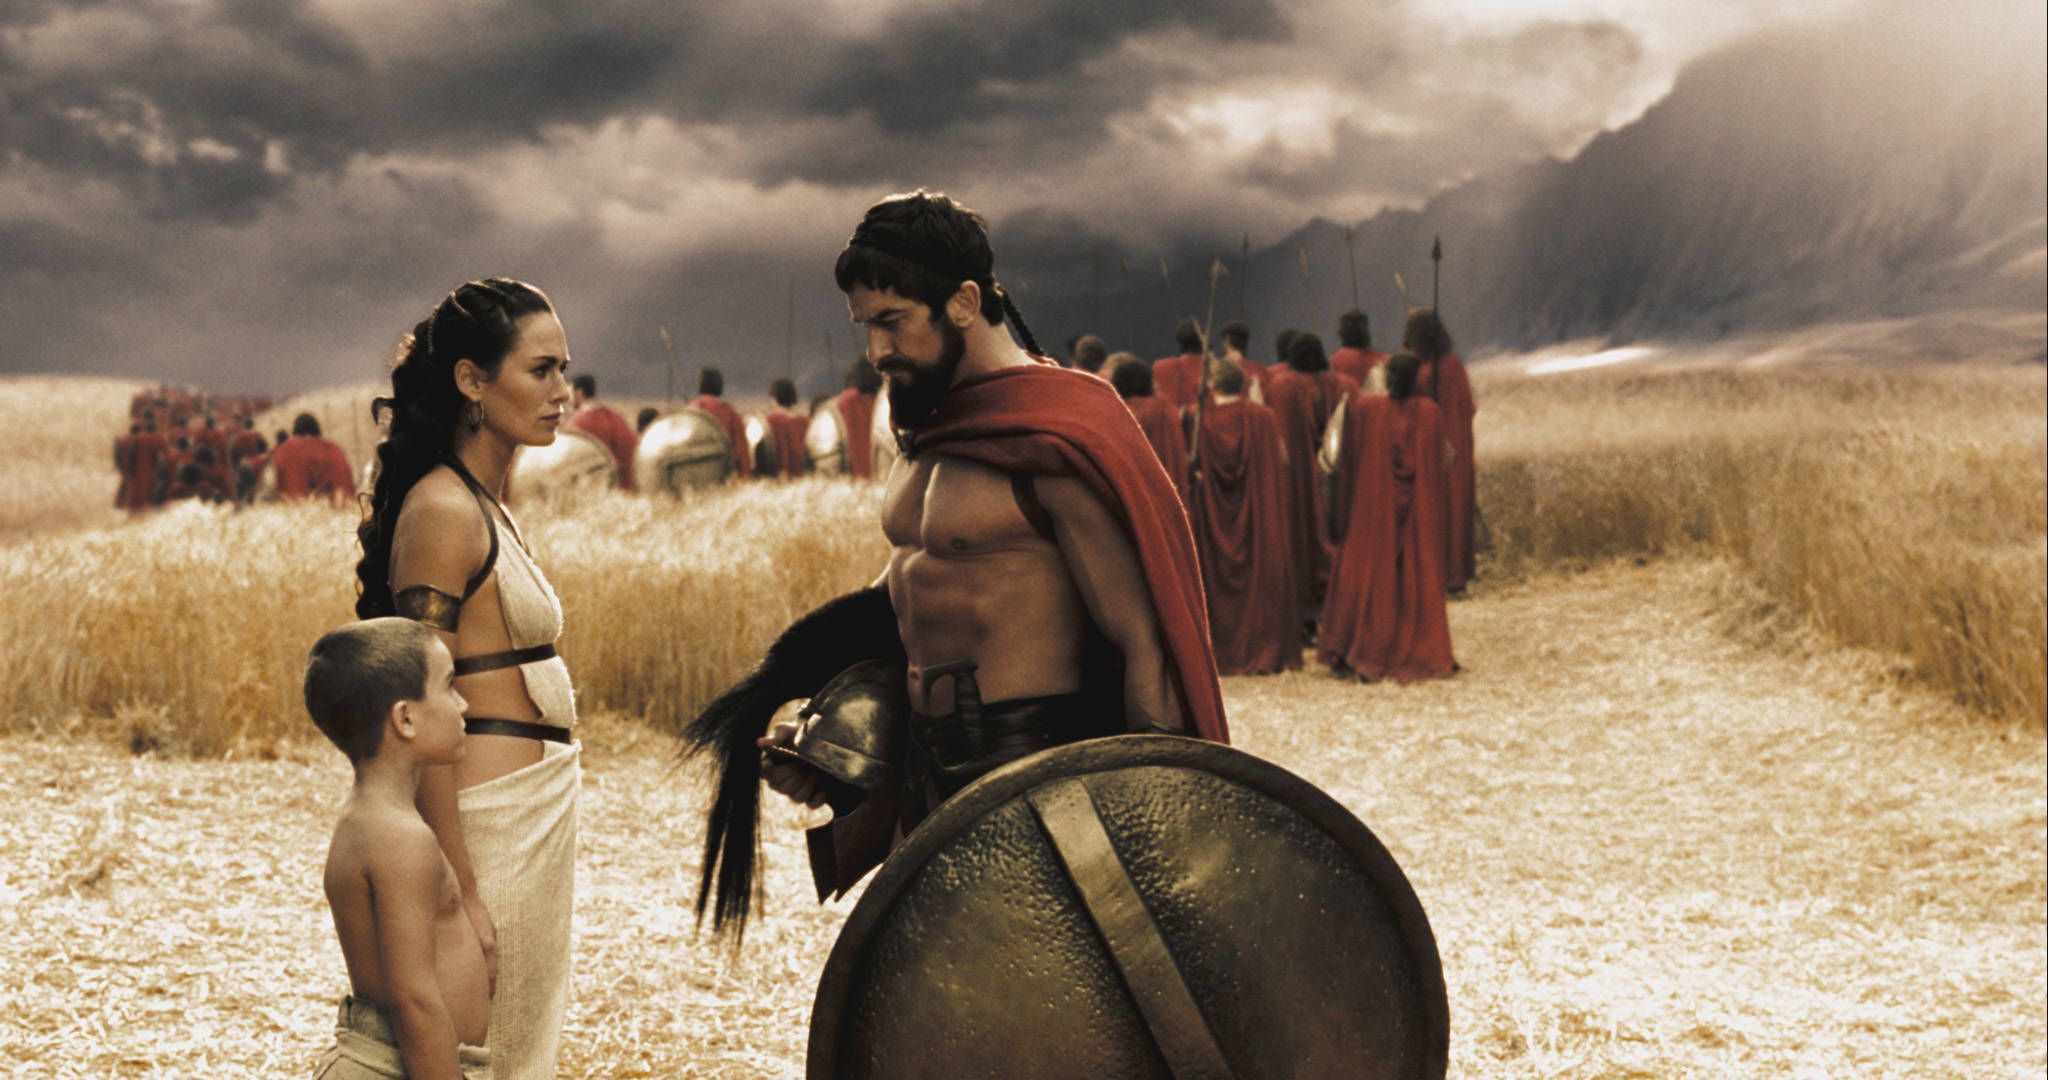 Quotes From The Movie 300. QuotesGram